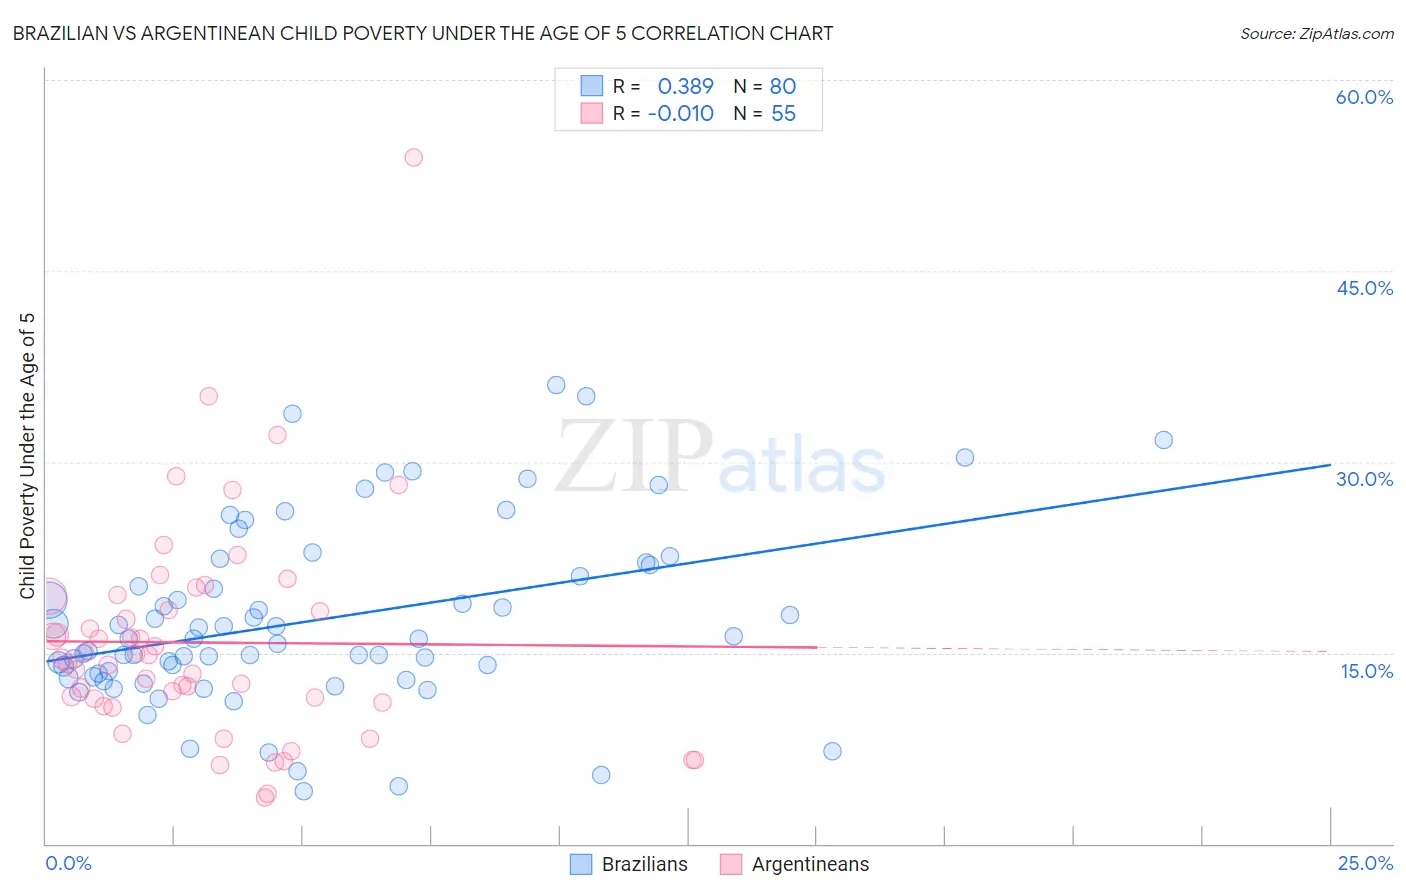 Brazilian vs Argentinean Child Poverty Under the Age of 5